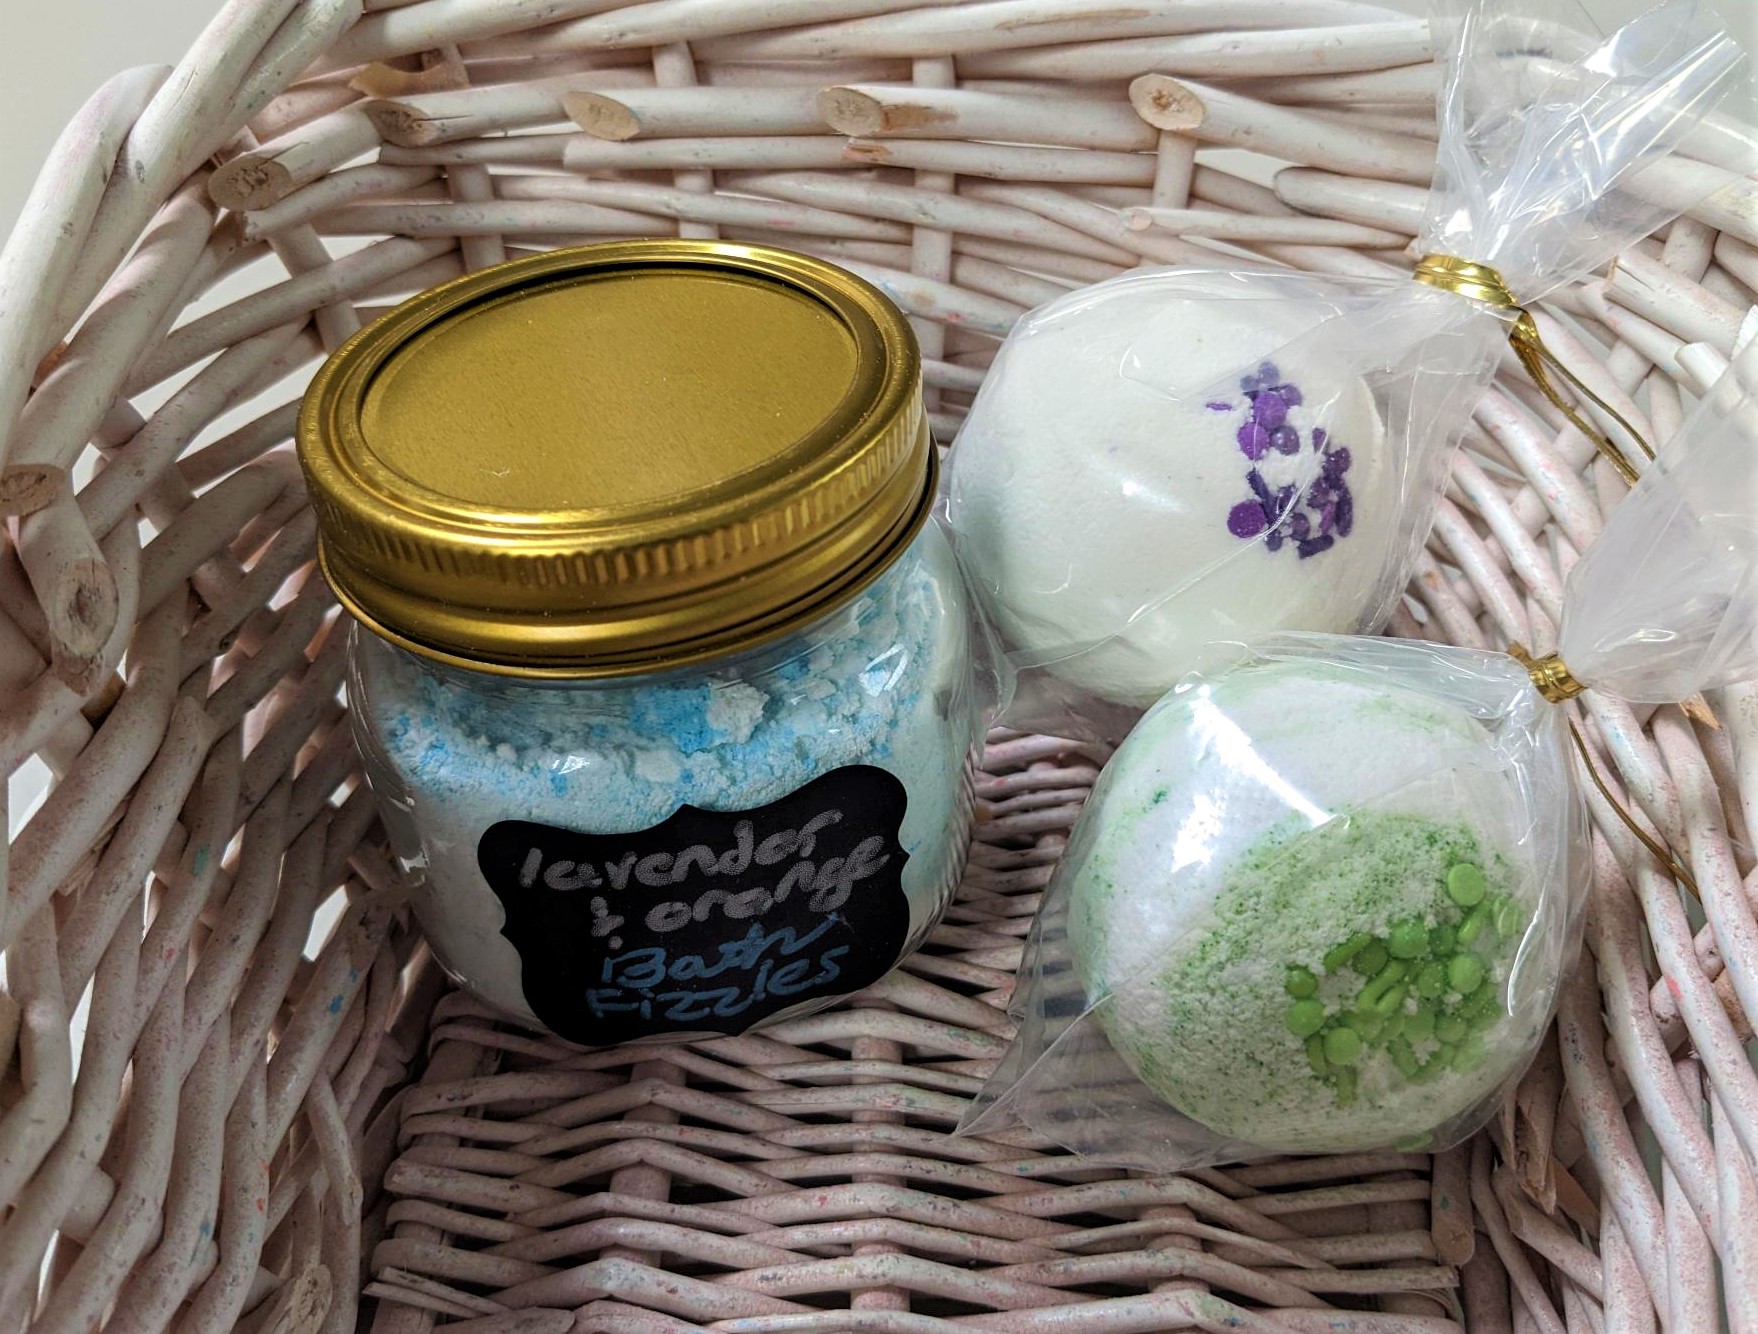 jar of blue and white bath fizzies, white bath bomb with purple sprinkles, and green and white marbled bath bomb